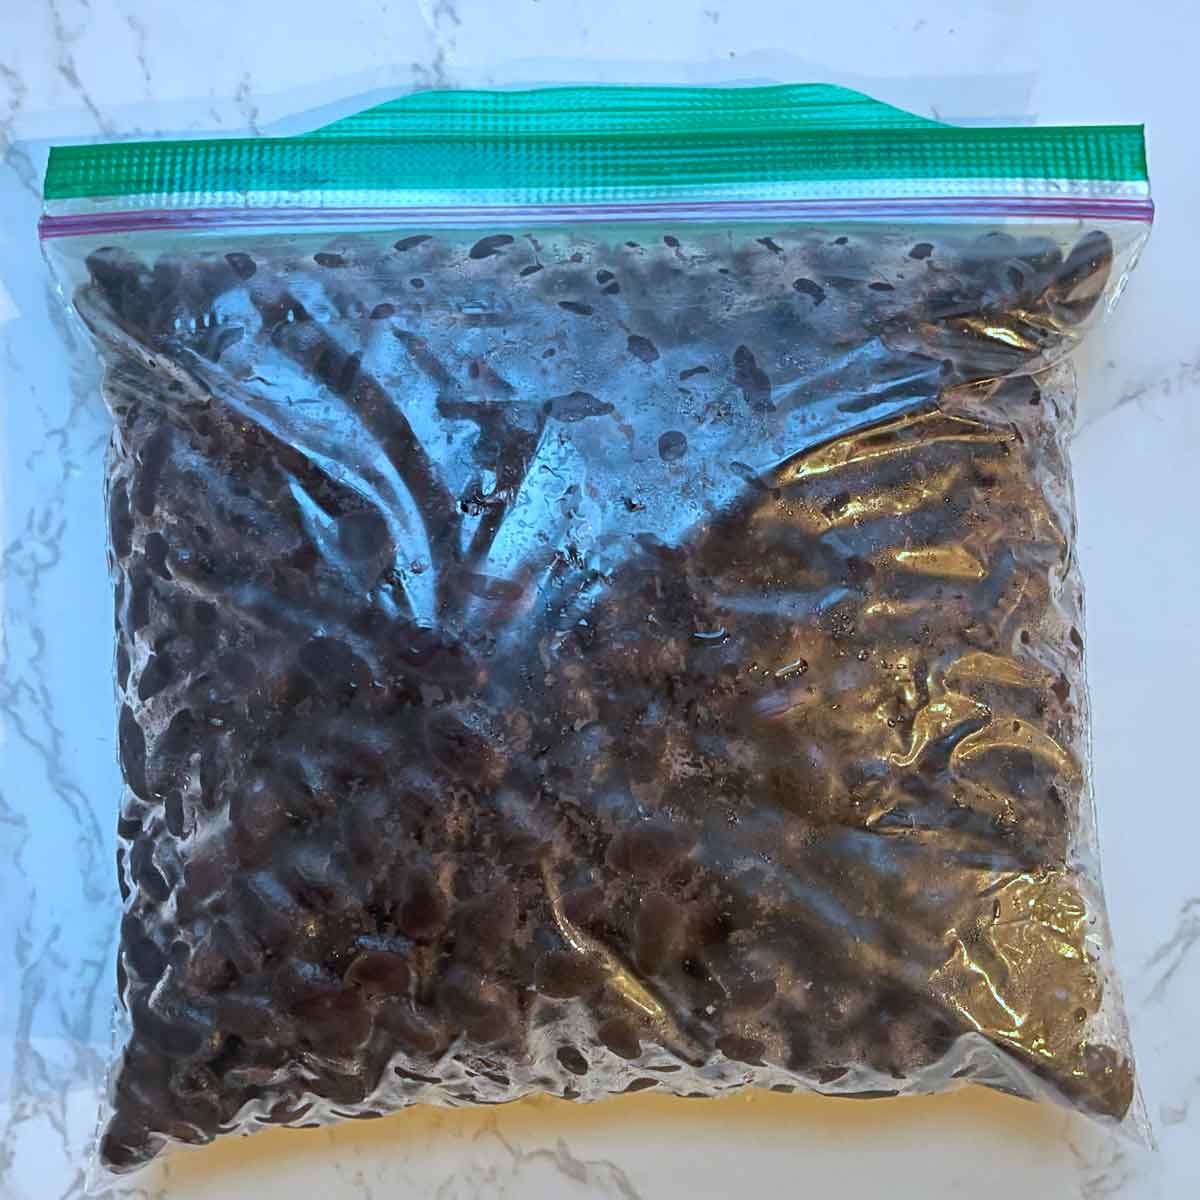 cooked black beans in a ziplock bag.